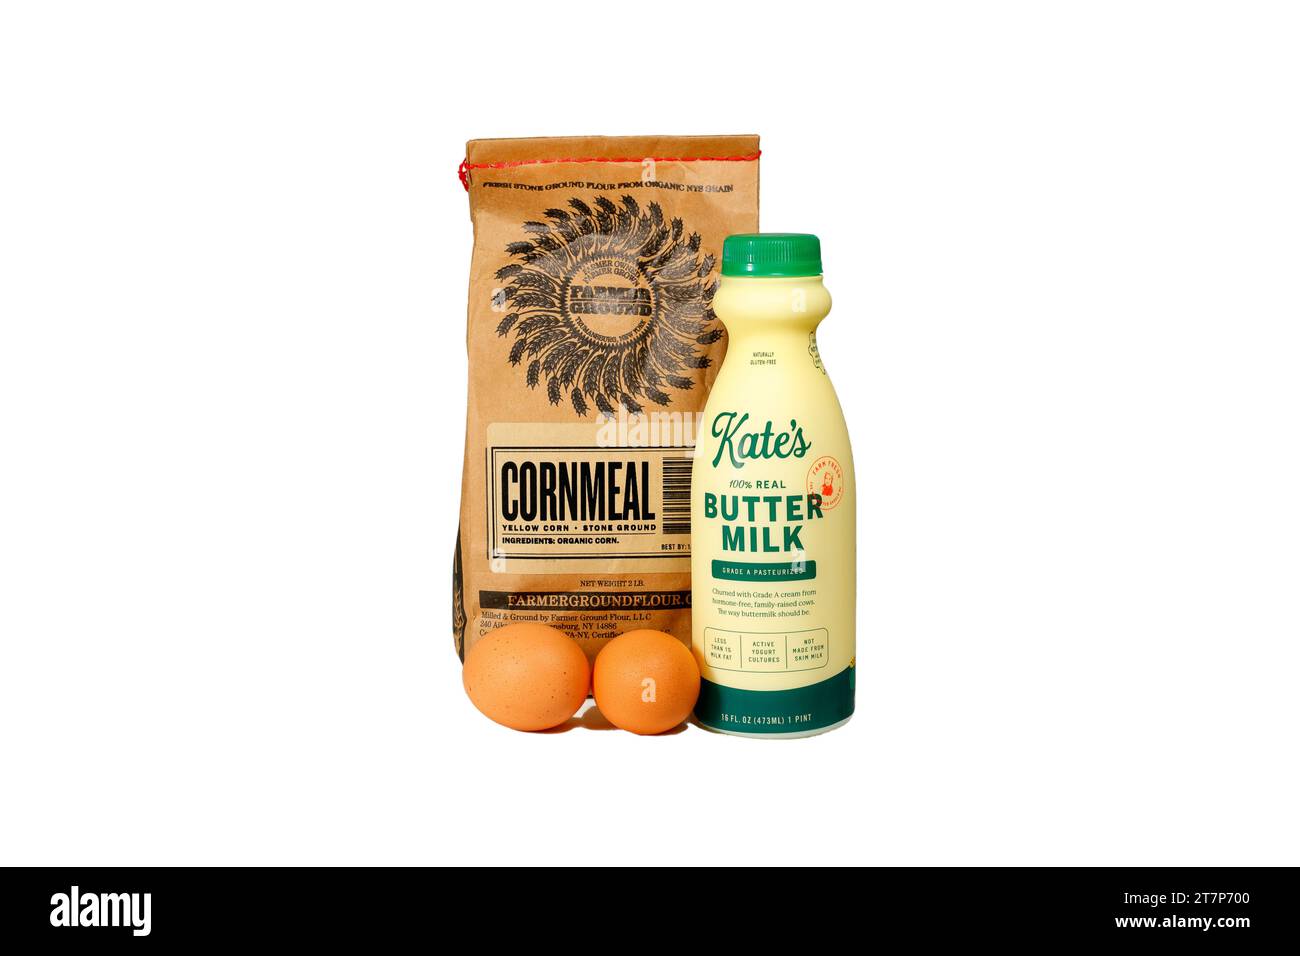 A bag of Farmer Ground Cornmeal, a bottle of Kate's Real Buttermilk, and two eggs isolated on a white background. cutout image for illustration and Stock Photo